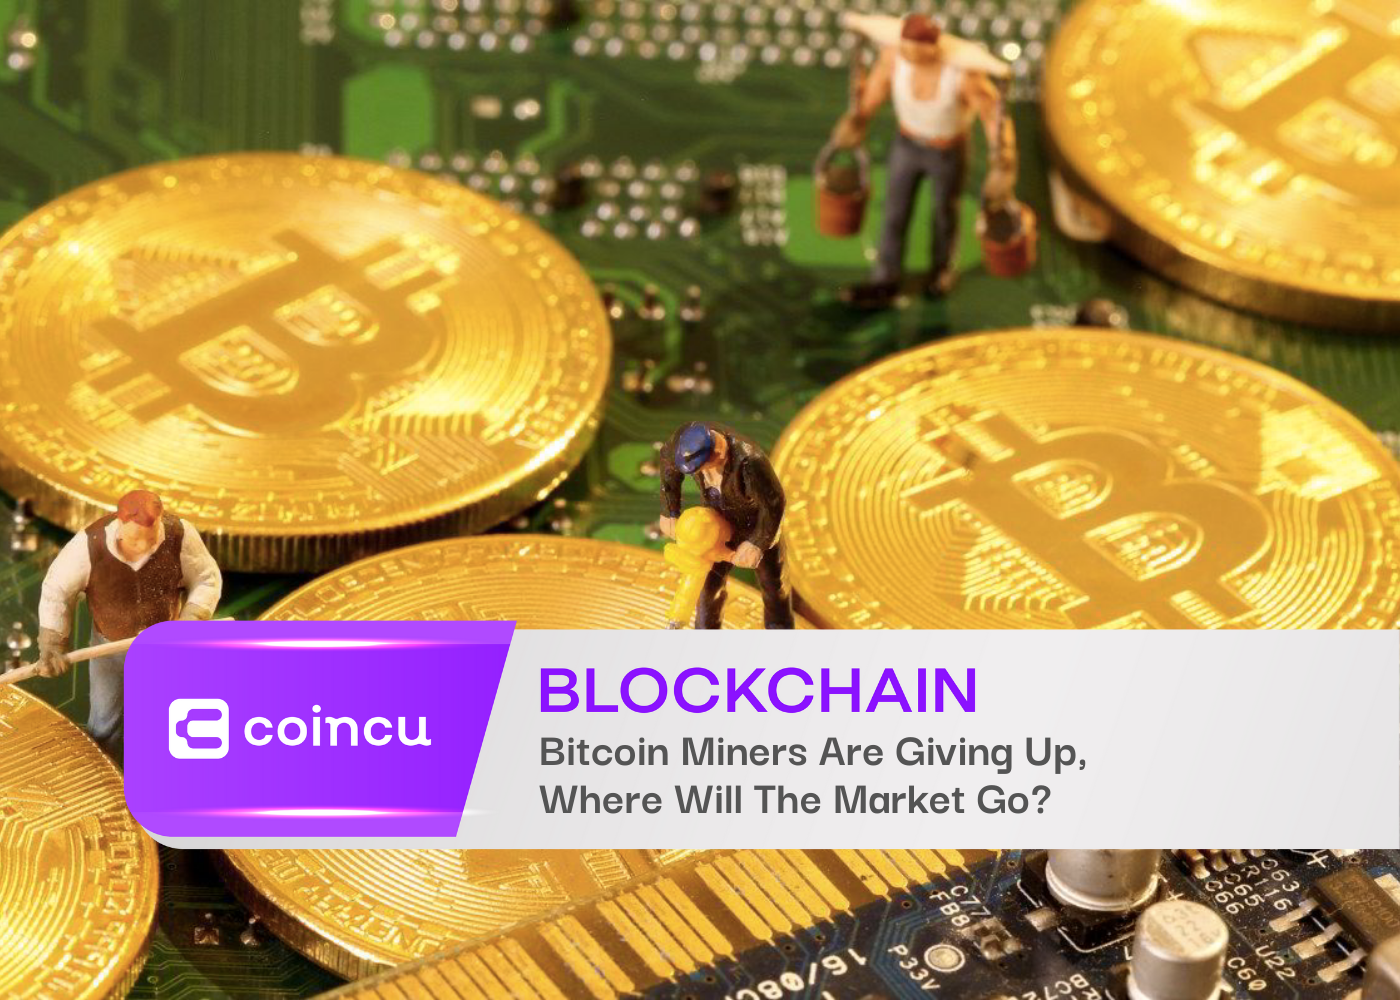 Bitcoin Miners Are Giving Up, Where Will The Market Go?